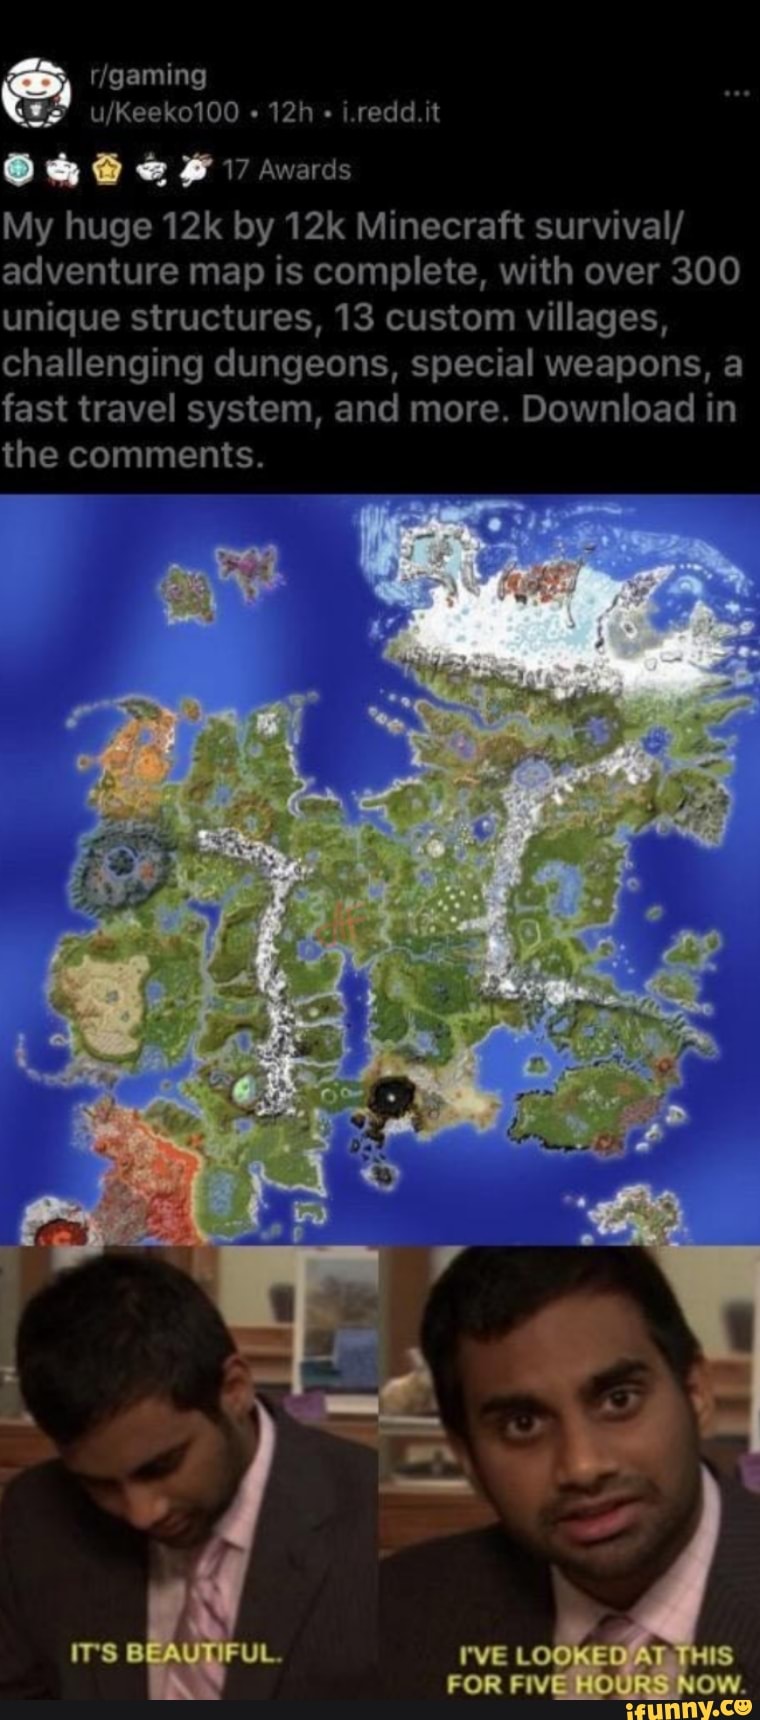 My 12k by 12k survival/adventure map is out! It features 300 unique  structures, 13 custom villages, dungeons, puzzles, a …